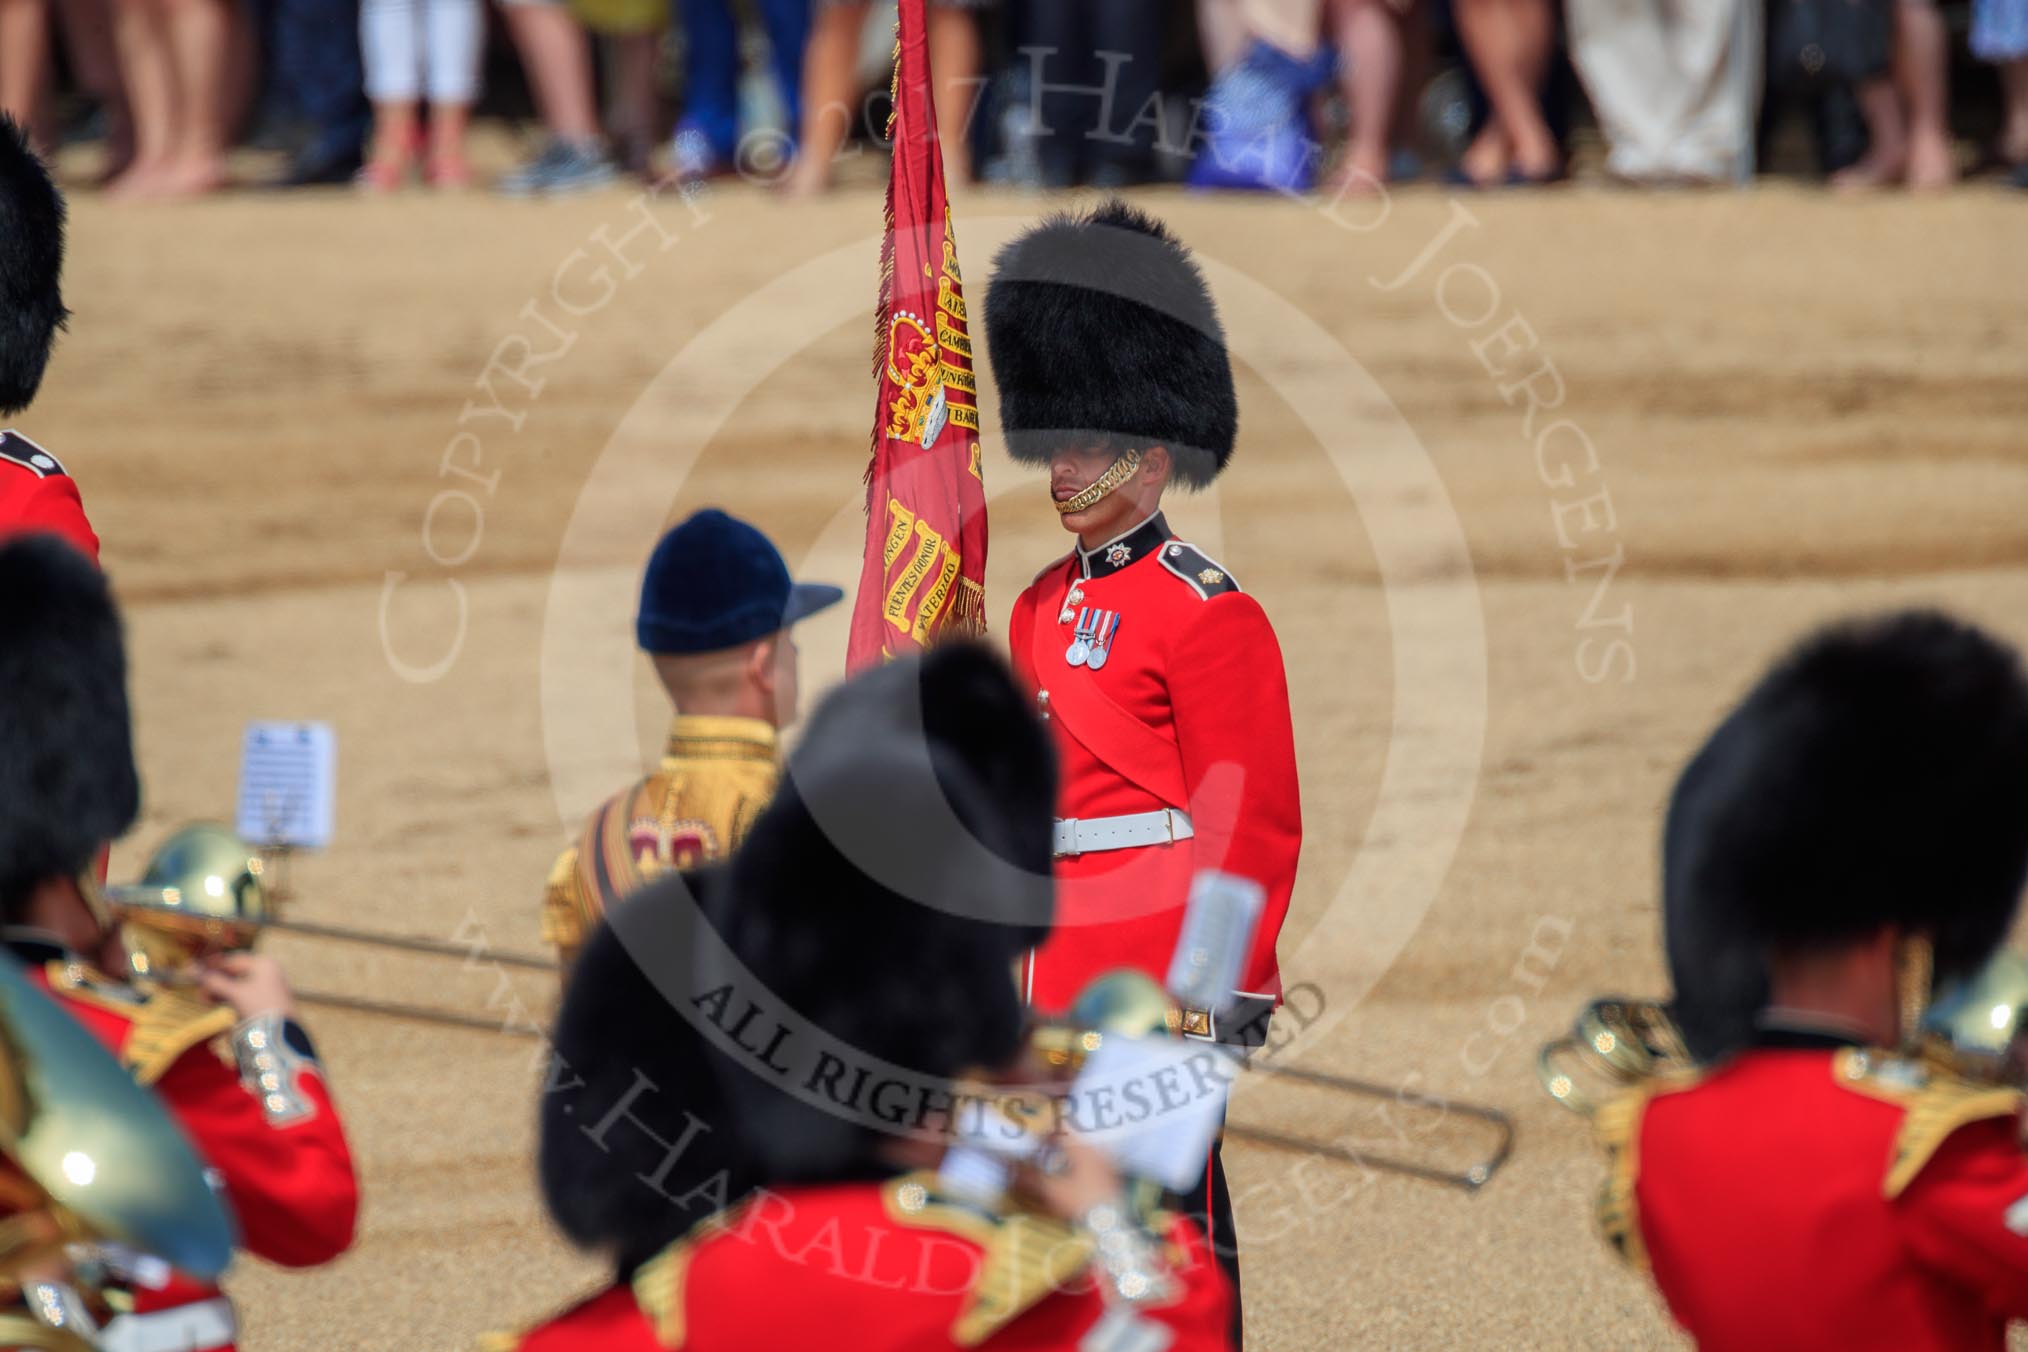 during Trooping the Colour {iptcyear4}, The Queen's Birthday Parade at Horse Guards Parade, Westminster, London, 9 June 2018, 11:10.